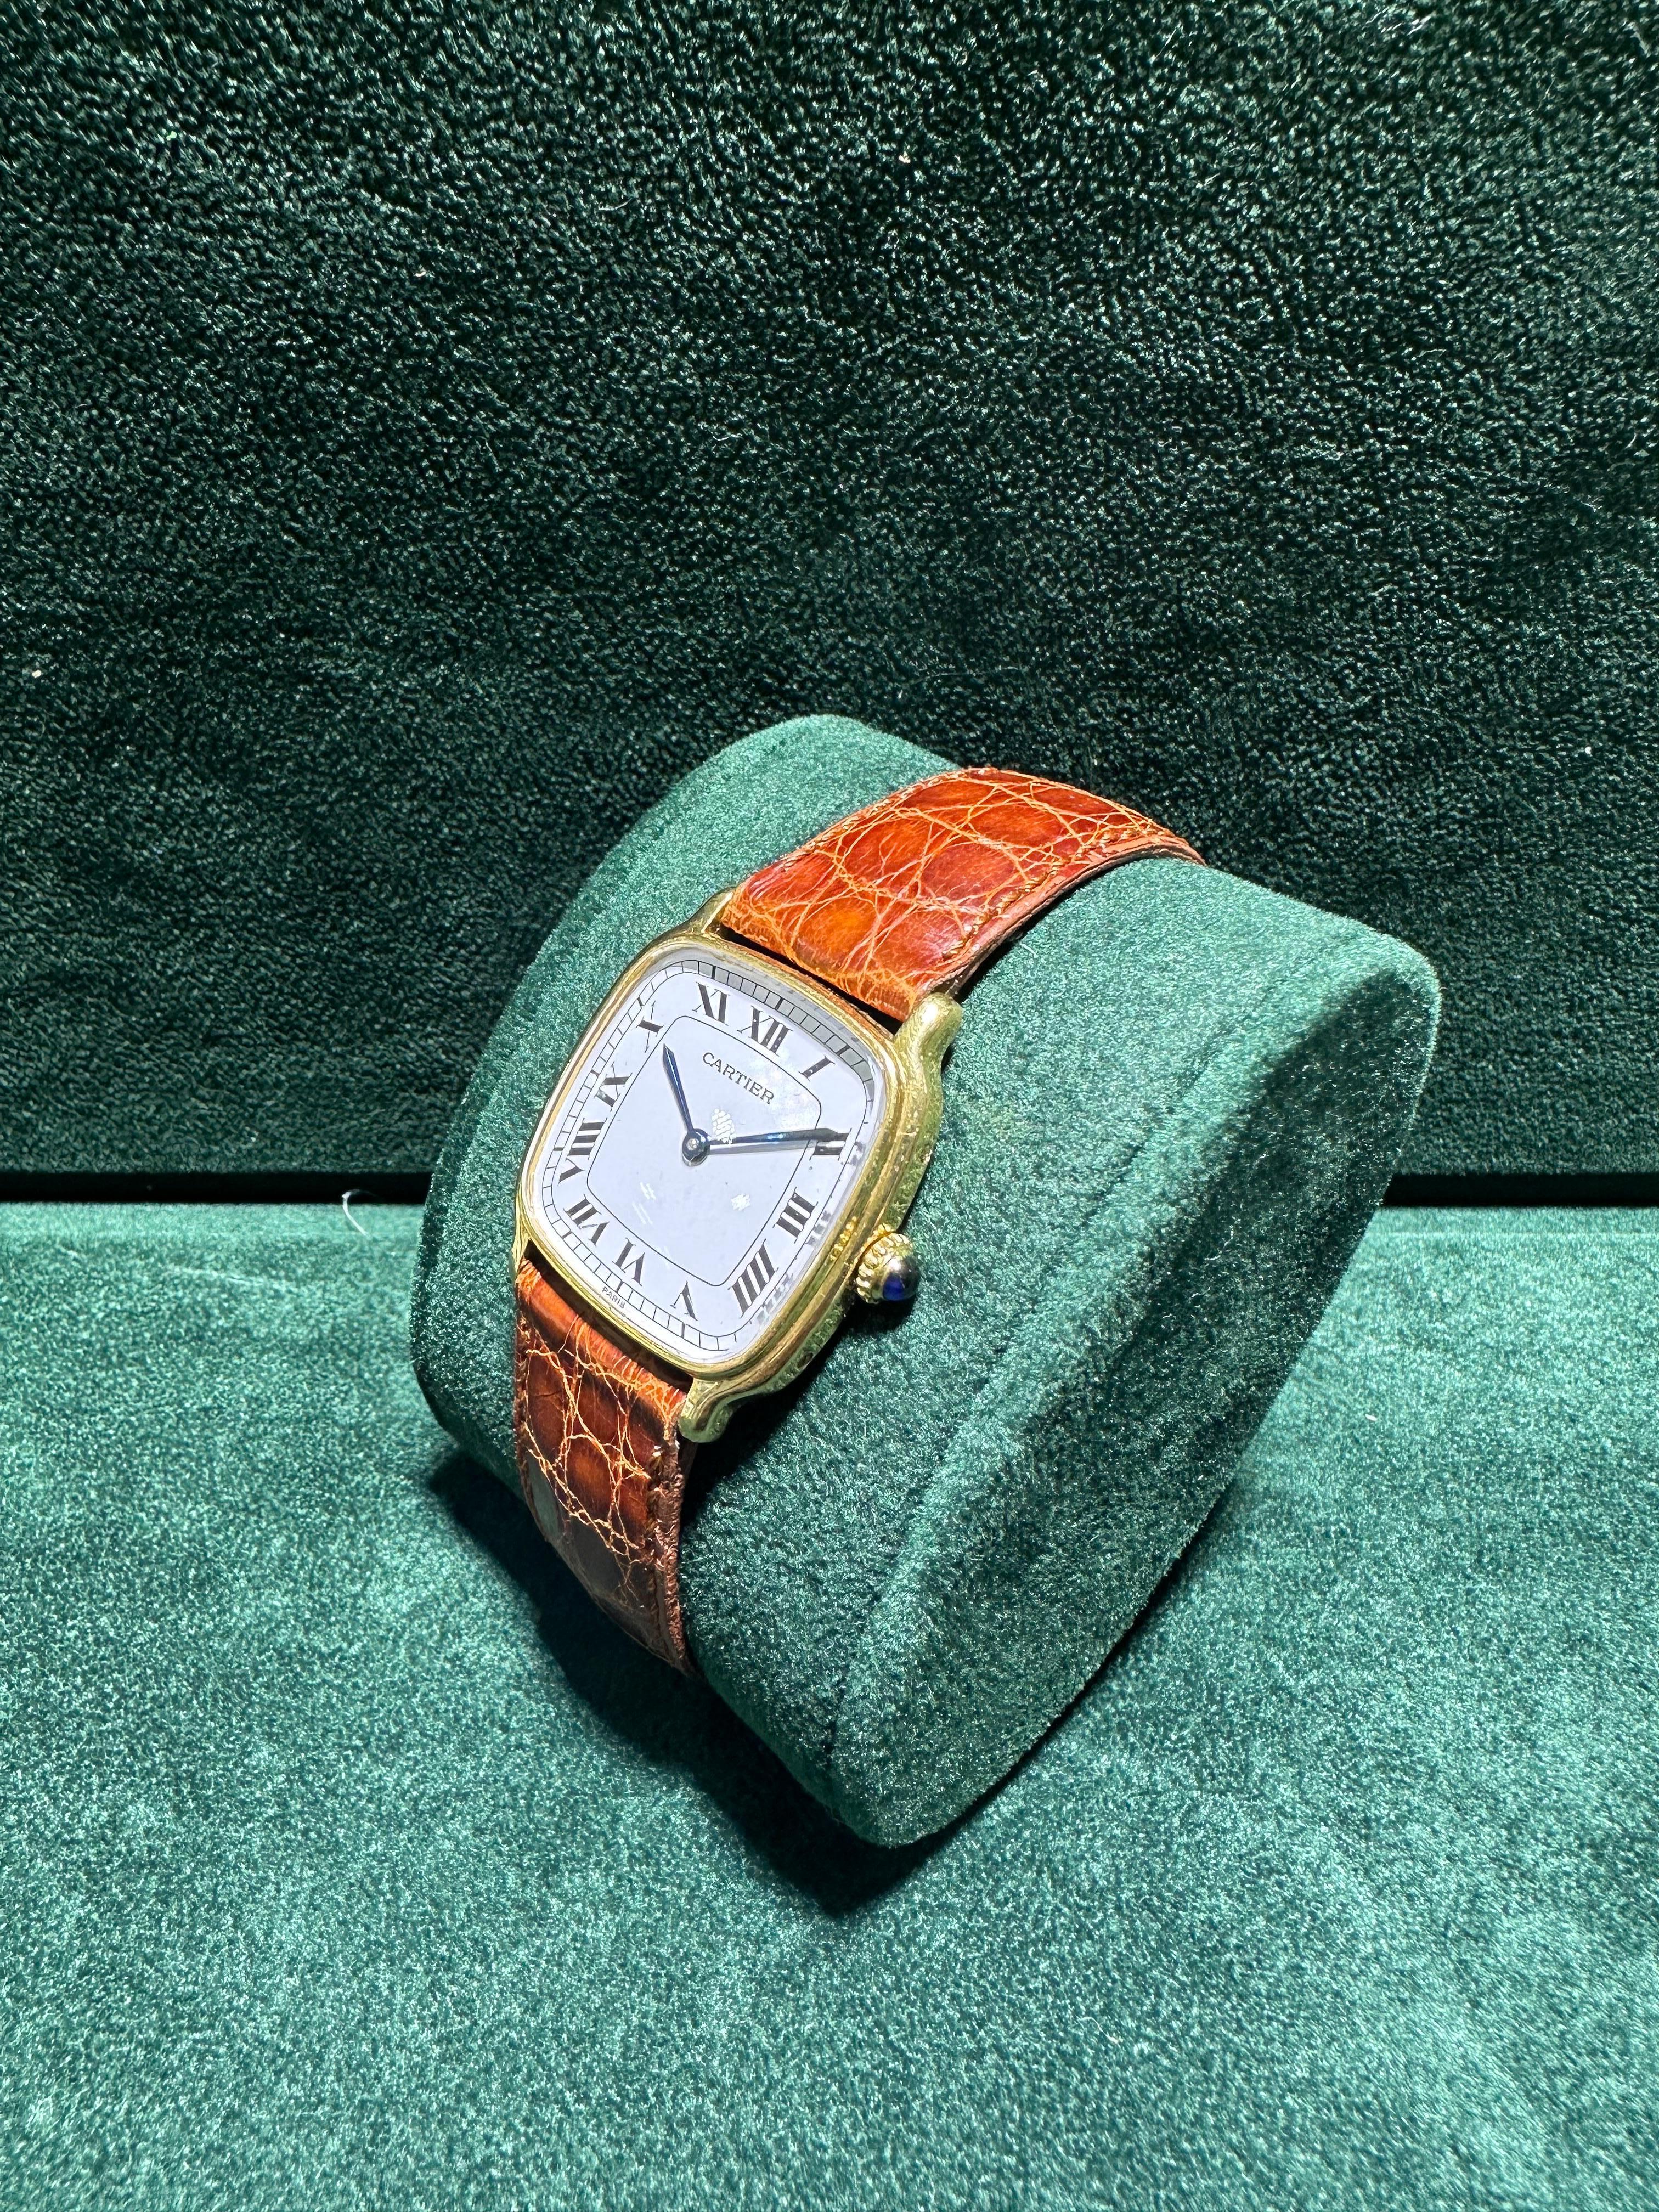 The Cartier Chambord was introduced in the 1975. In 1973, 12 models were commercialized within the new Louis Cartier collection (Ceinture, Square, Ellipse, Santos, Baignoire, Vendôme, Cristallor, Gondole, Fabergé, Coussin, Tank Normale and Tank